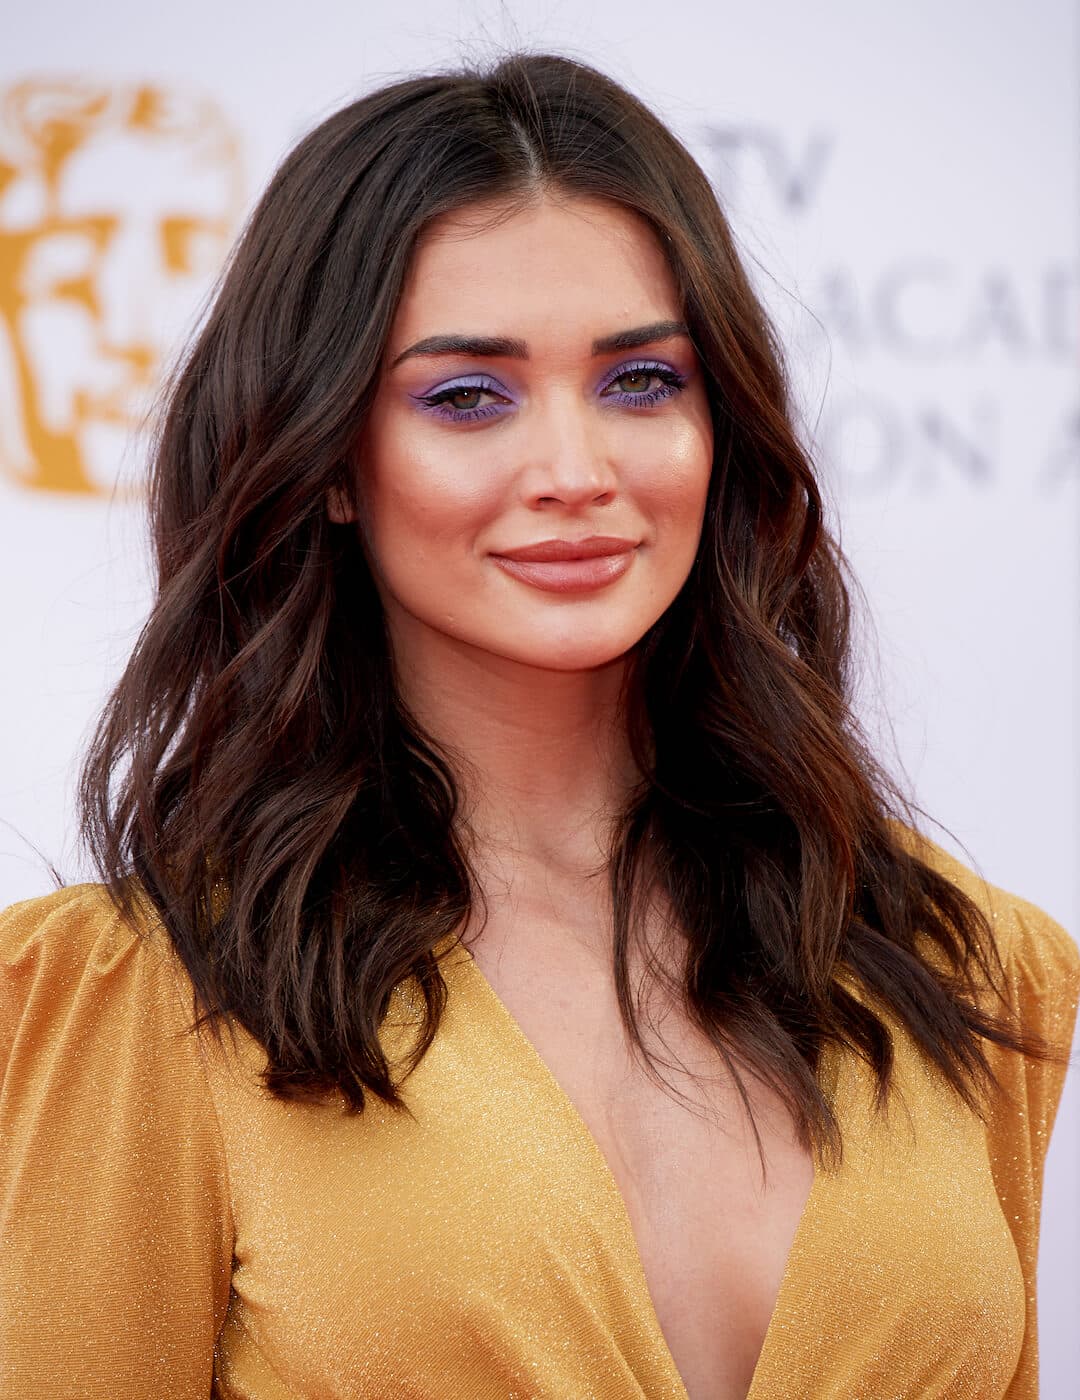 Amy Jackson attends the Virgin TV British Academy Television Awards at The Royal Festival Hall